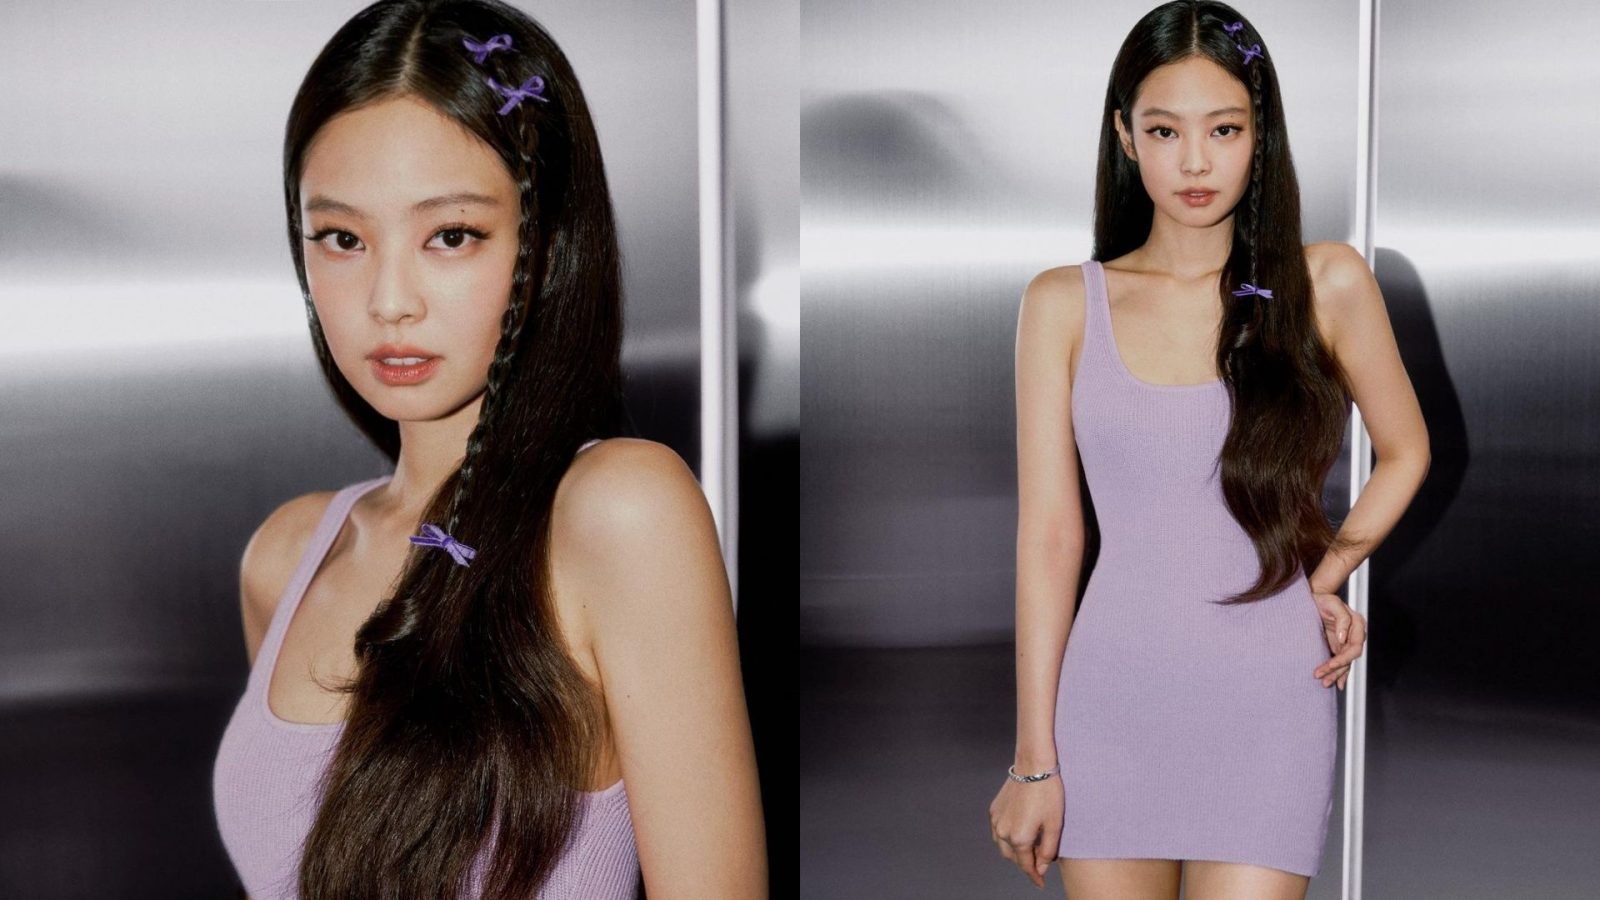 BLACKPINK's Jennie stuns fans in latest commercial for beauty brand HERA